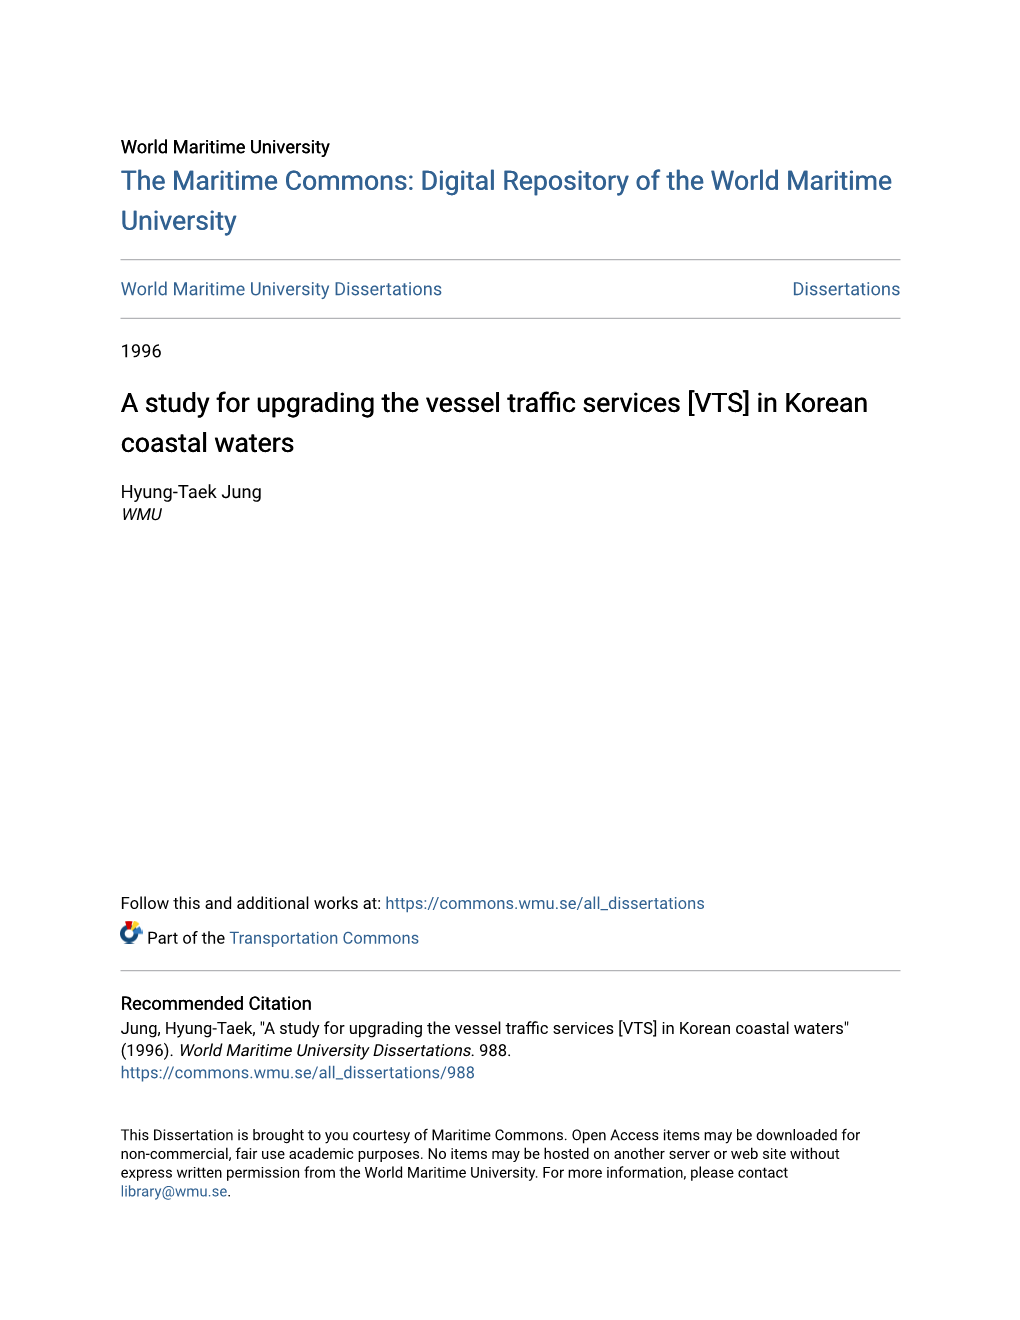 A Study for Upgrading the Vessel Traffic Services [VTS] in Korean Coastal Waters